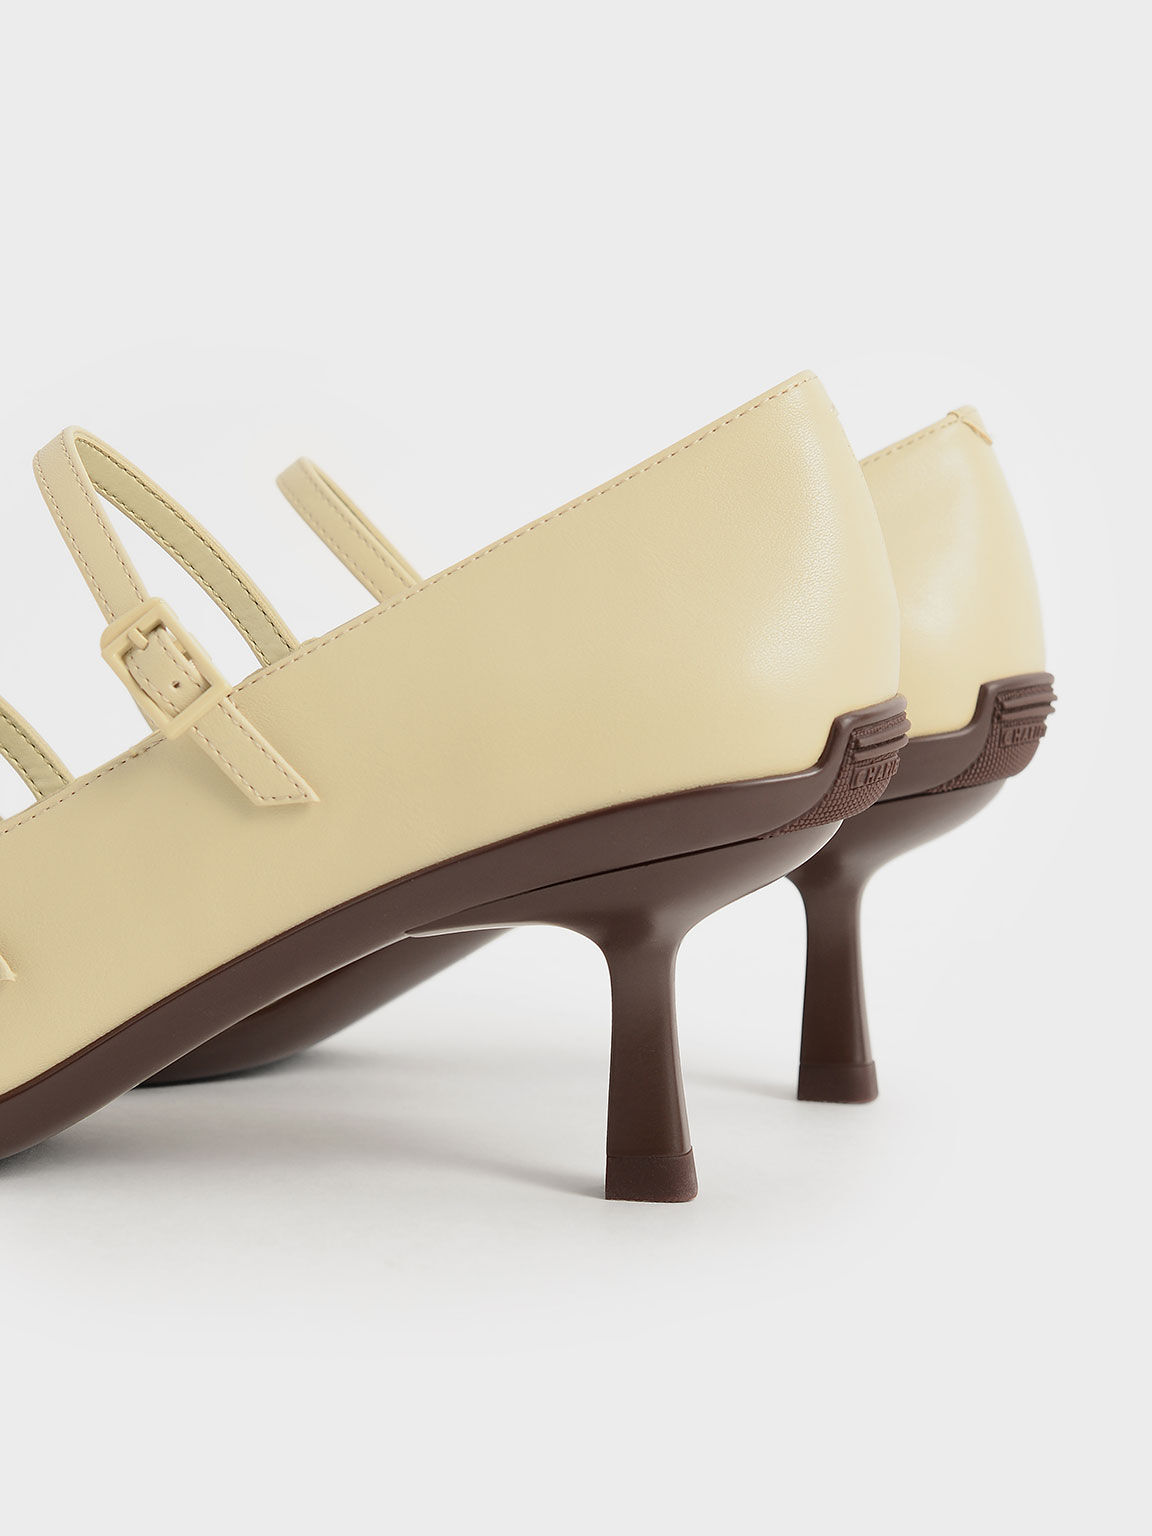 Double Strap Mary Jane Pumps, Sand, hi-res